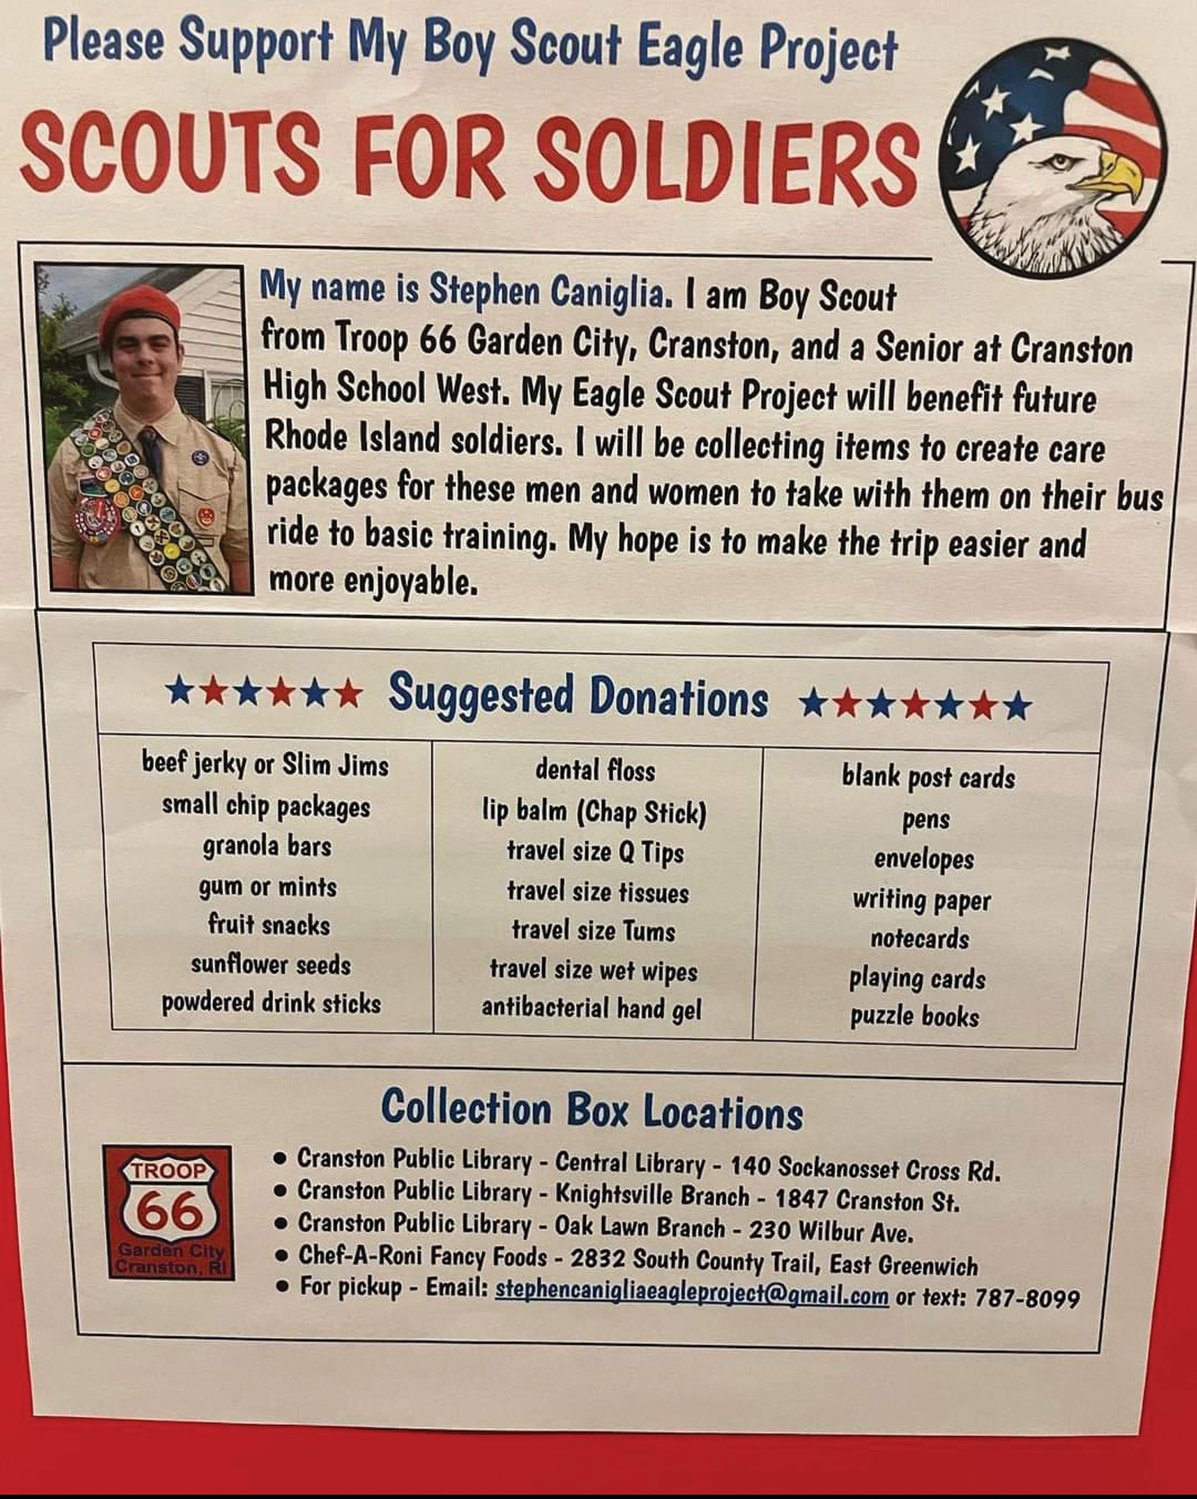 SUGGESTED DONATIONS: Stephen Caniglia has distributed this flyer, looking for donations to help him complete his Eagle Scout project.